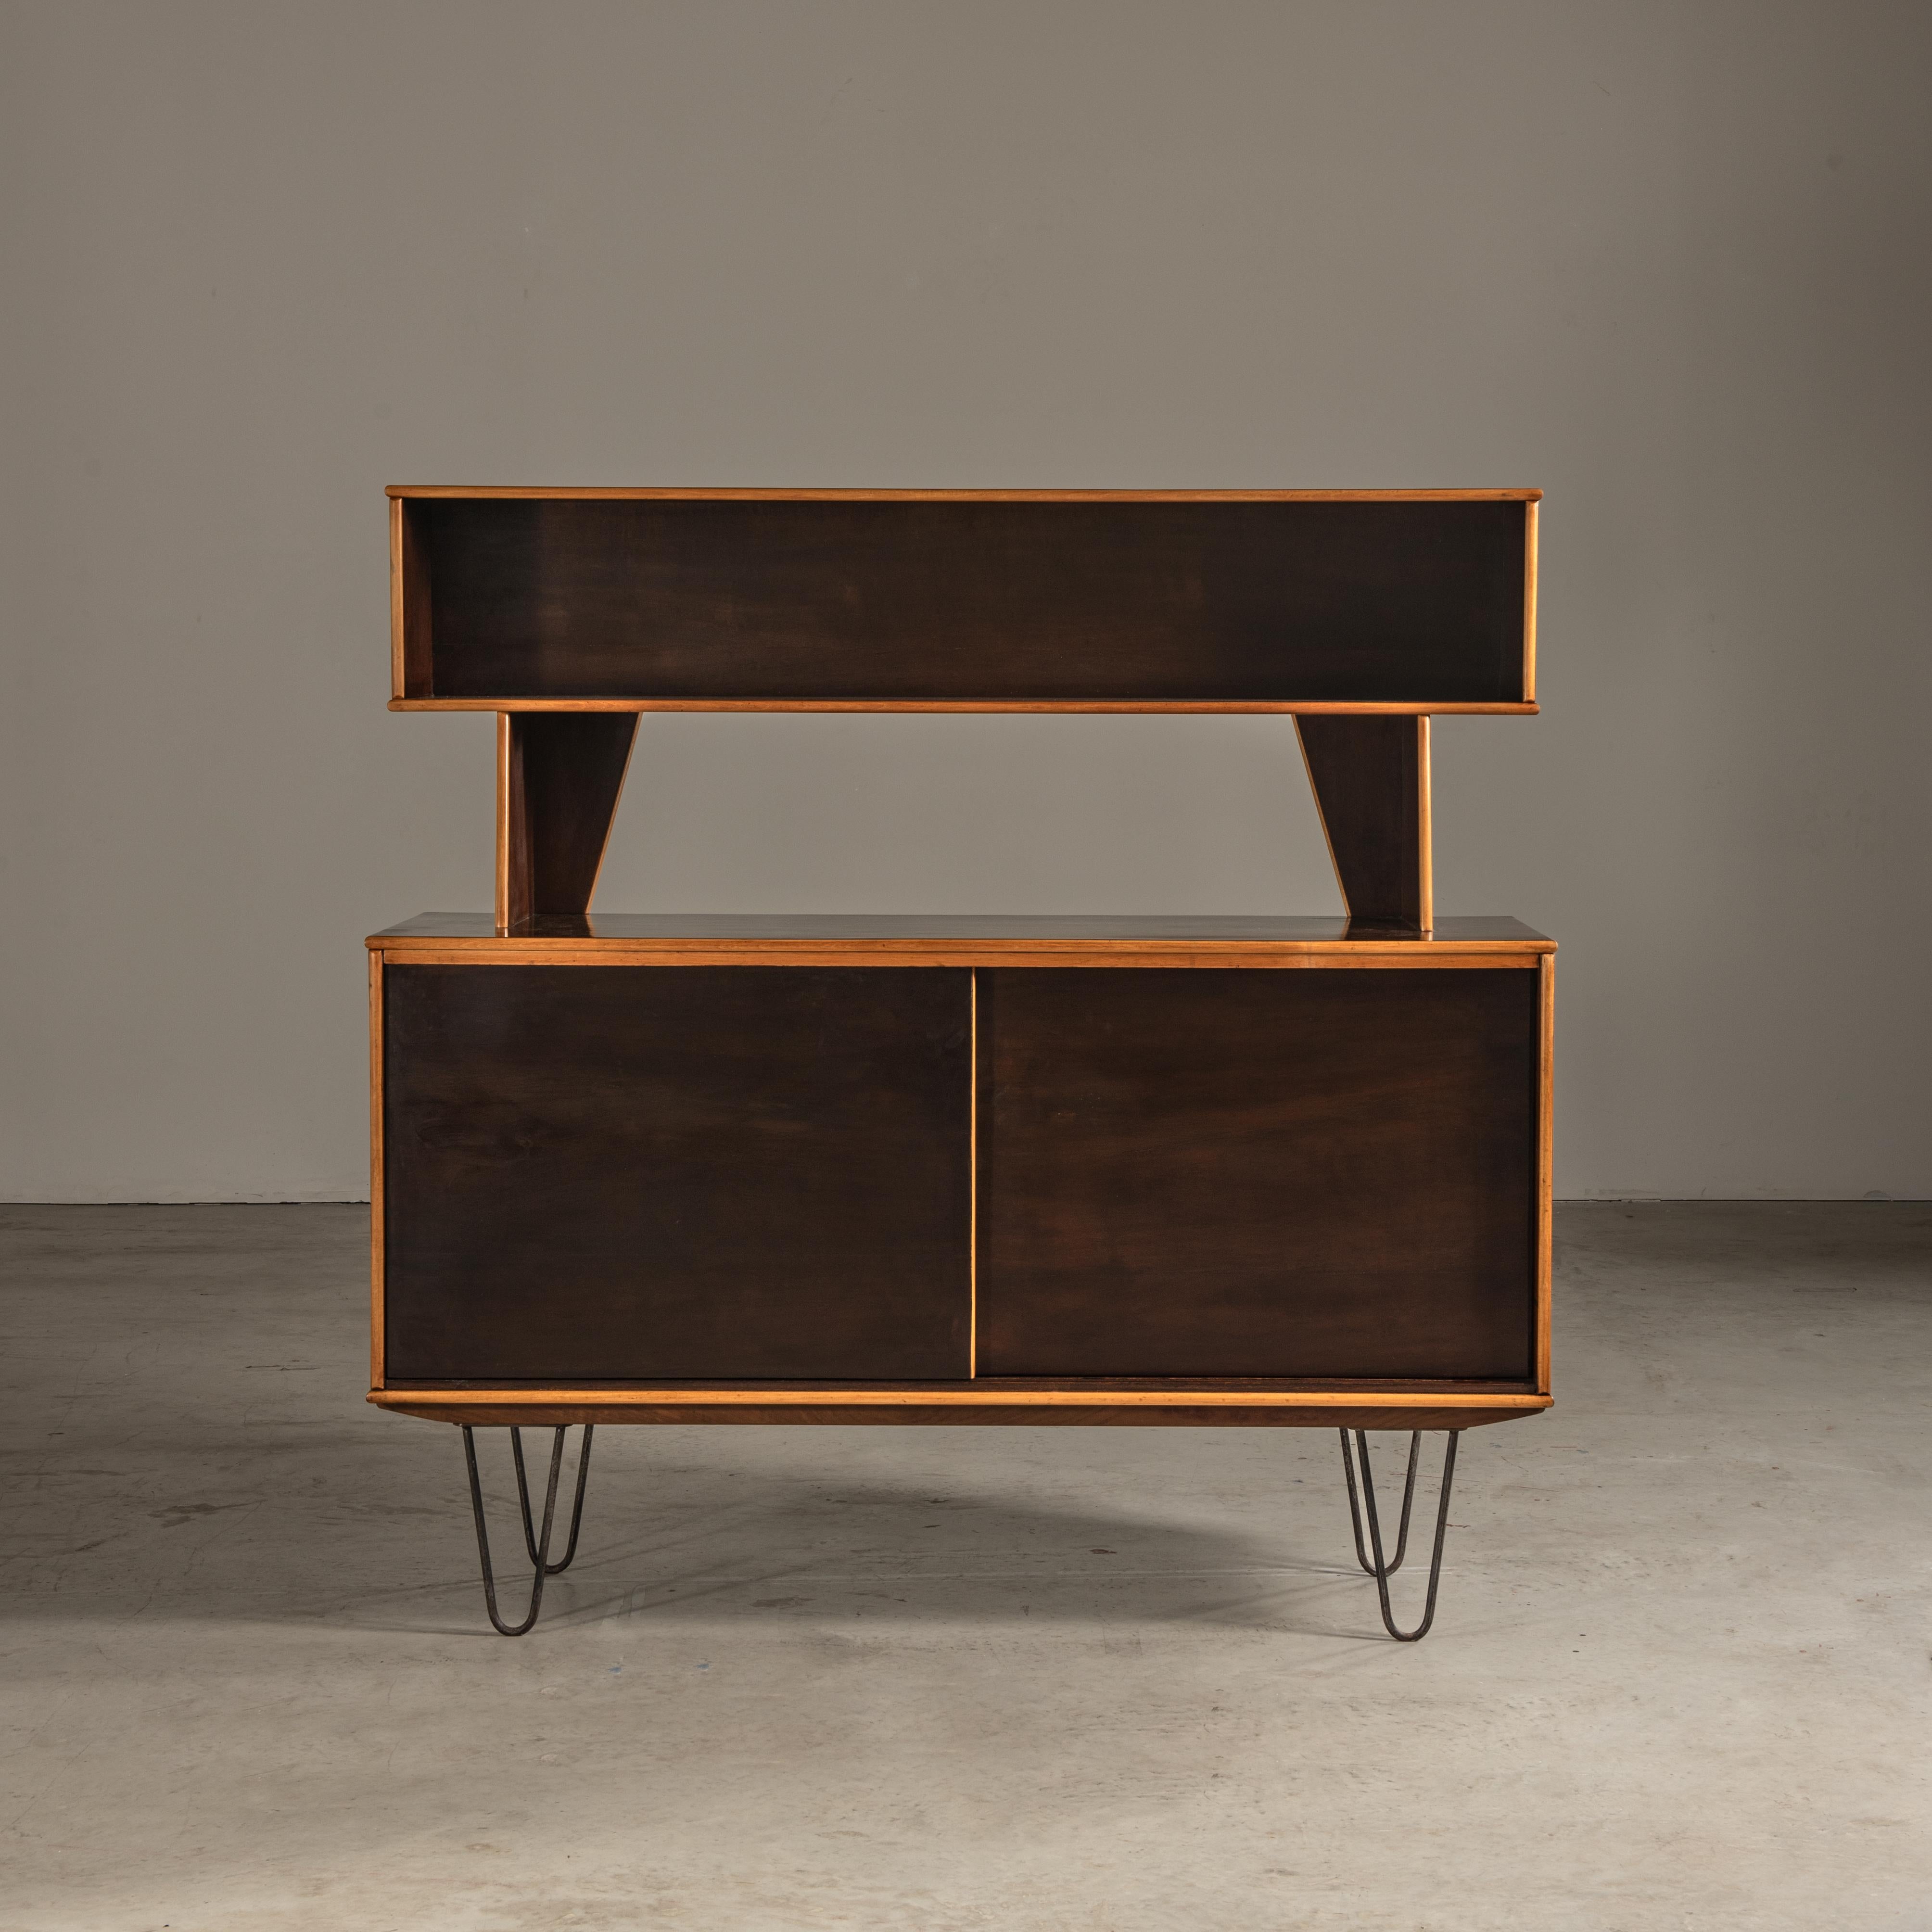 Mid-Century Modern Large Sideboard in Wood and Iron, by Martin Eisler, Mid-Century Brazilian Design